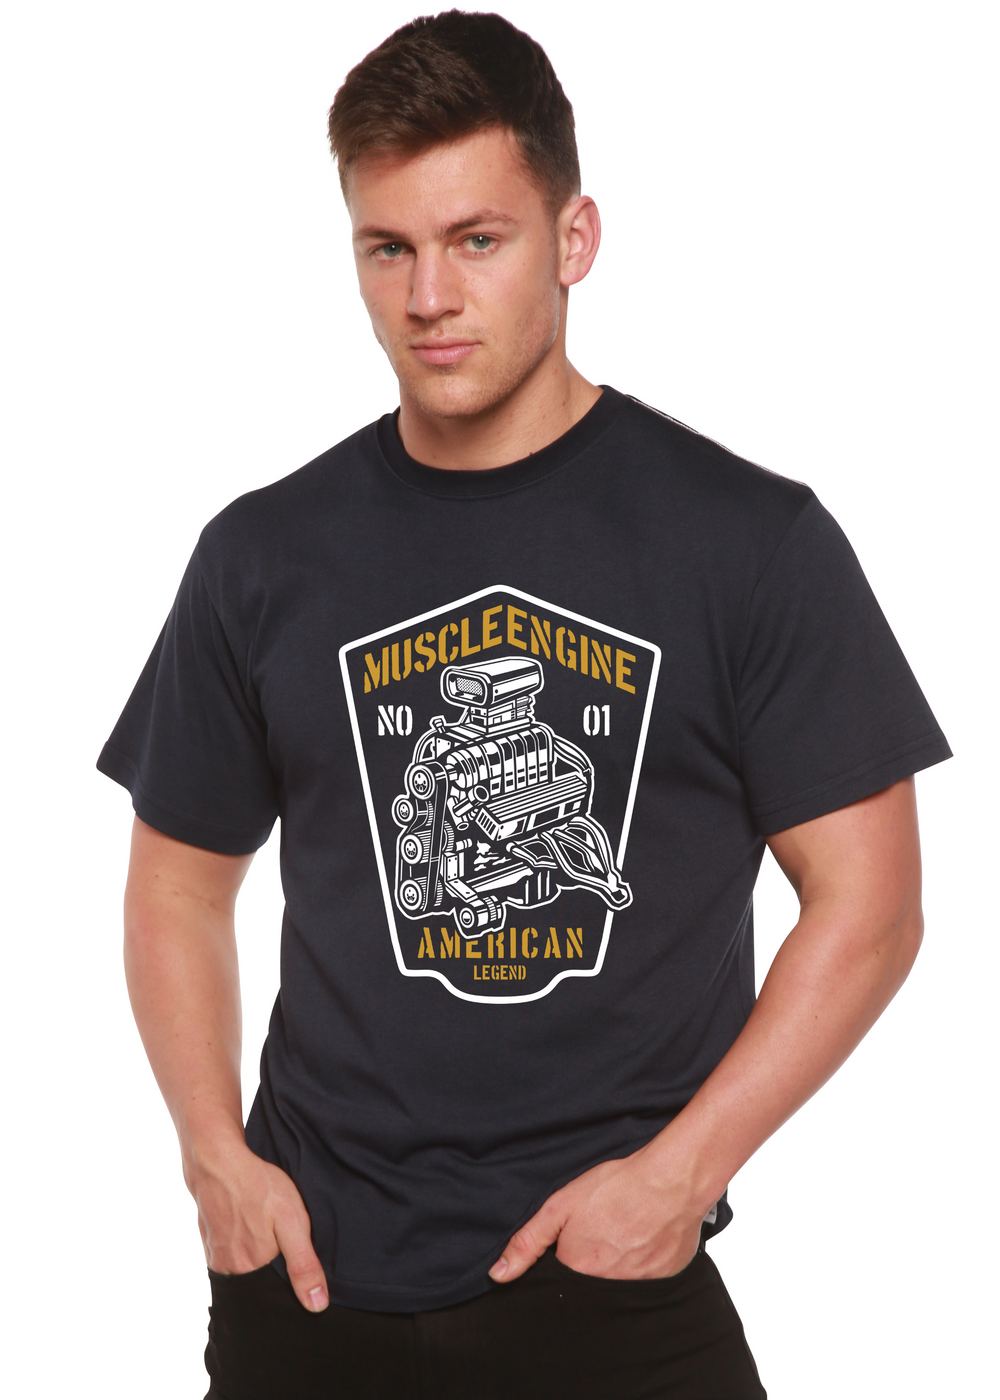 Muscle Engine men's bamboo tshirt navy blue